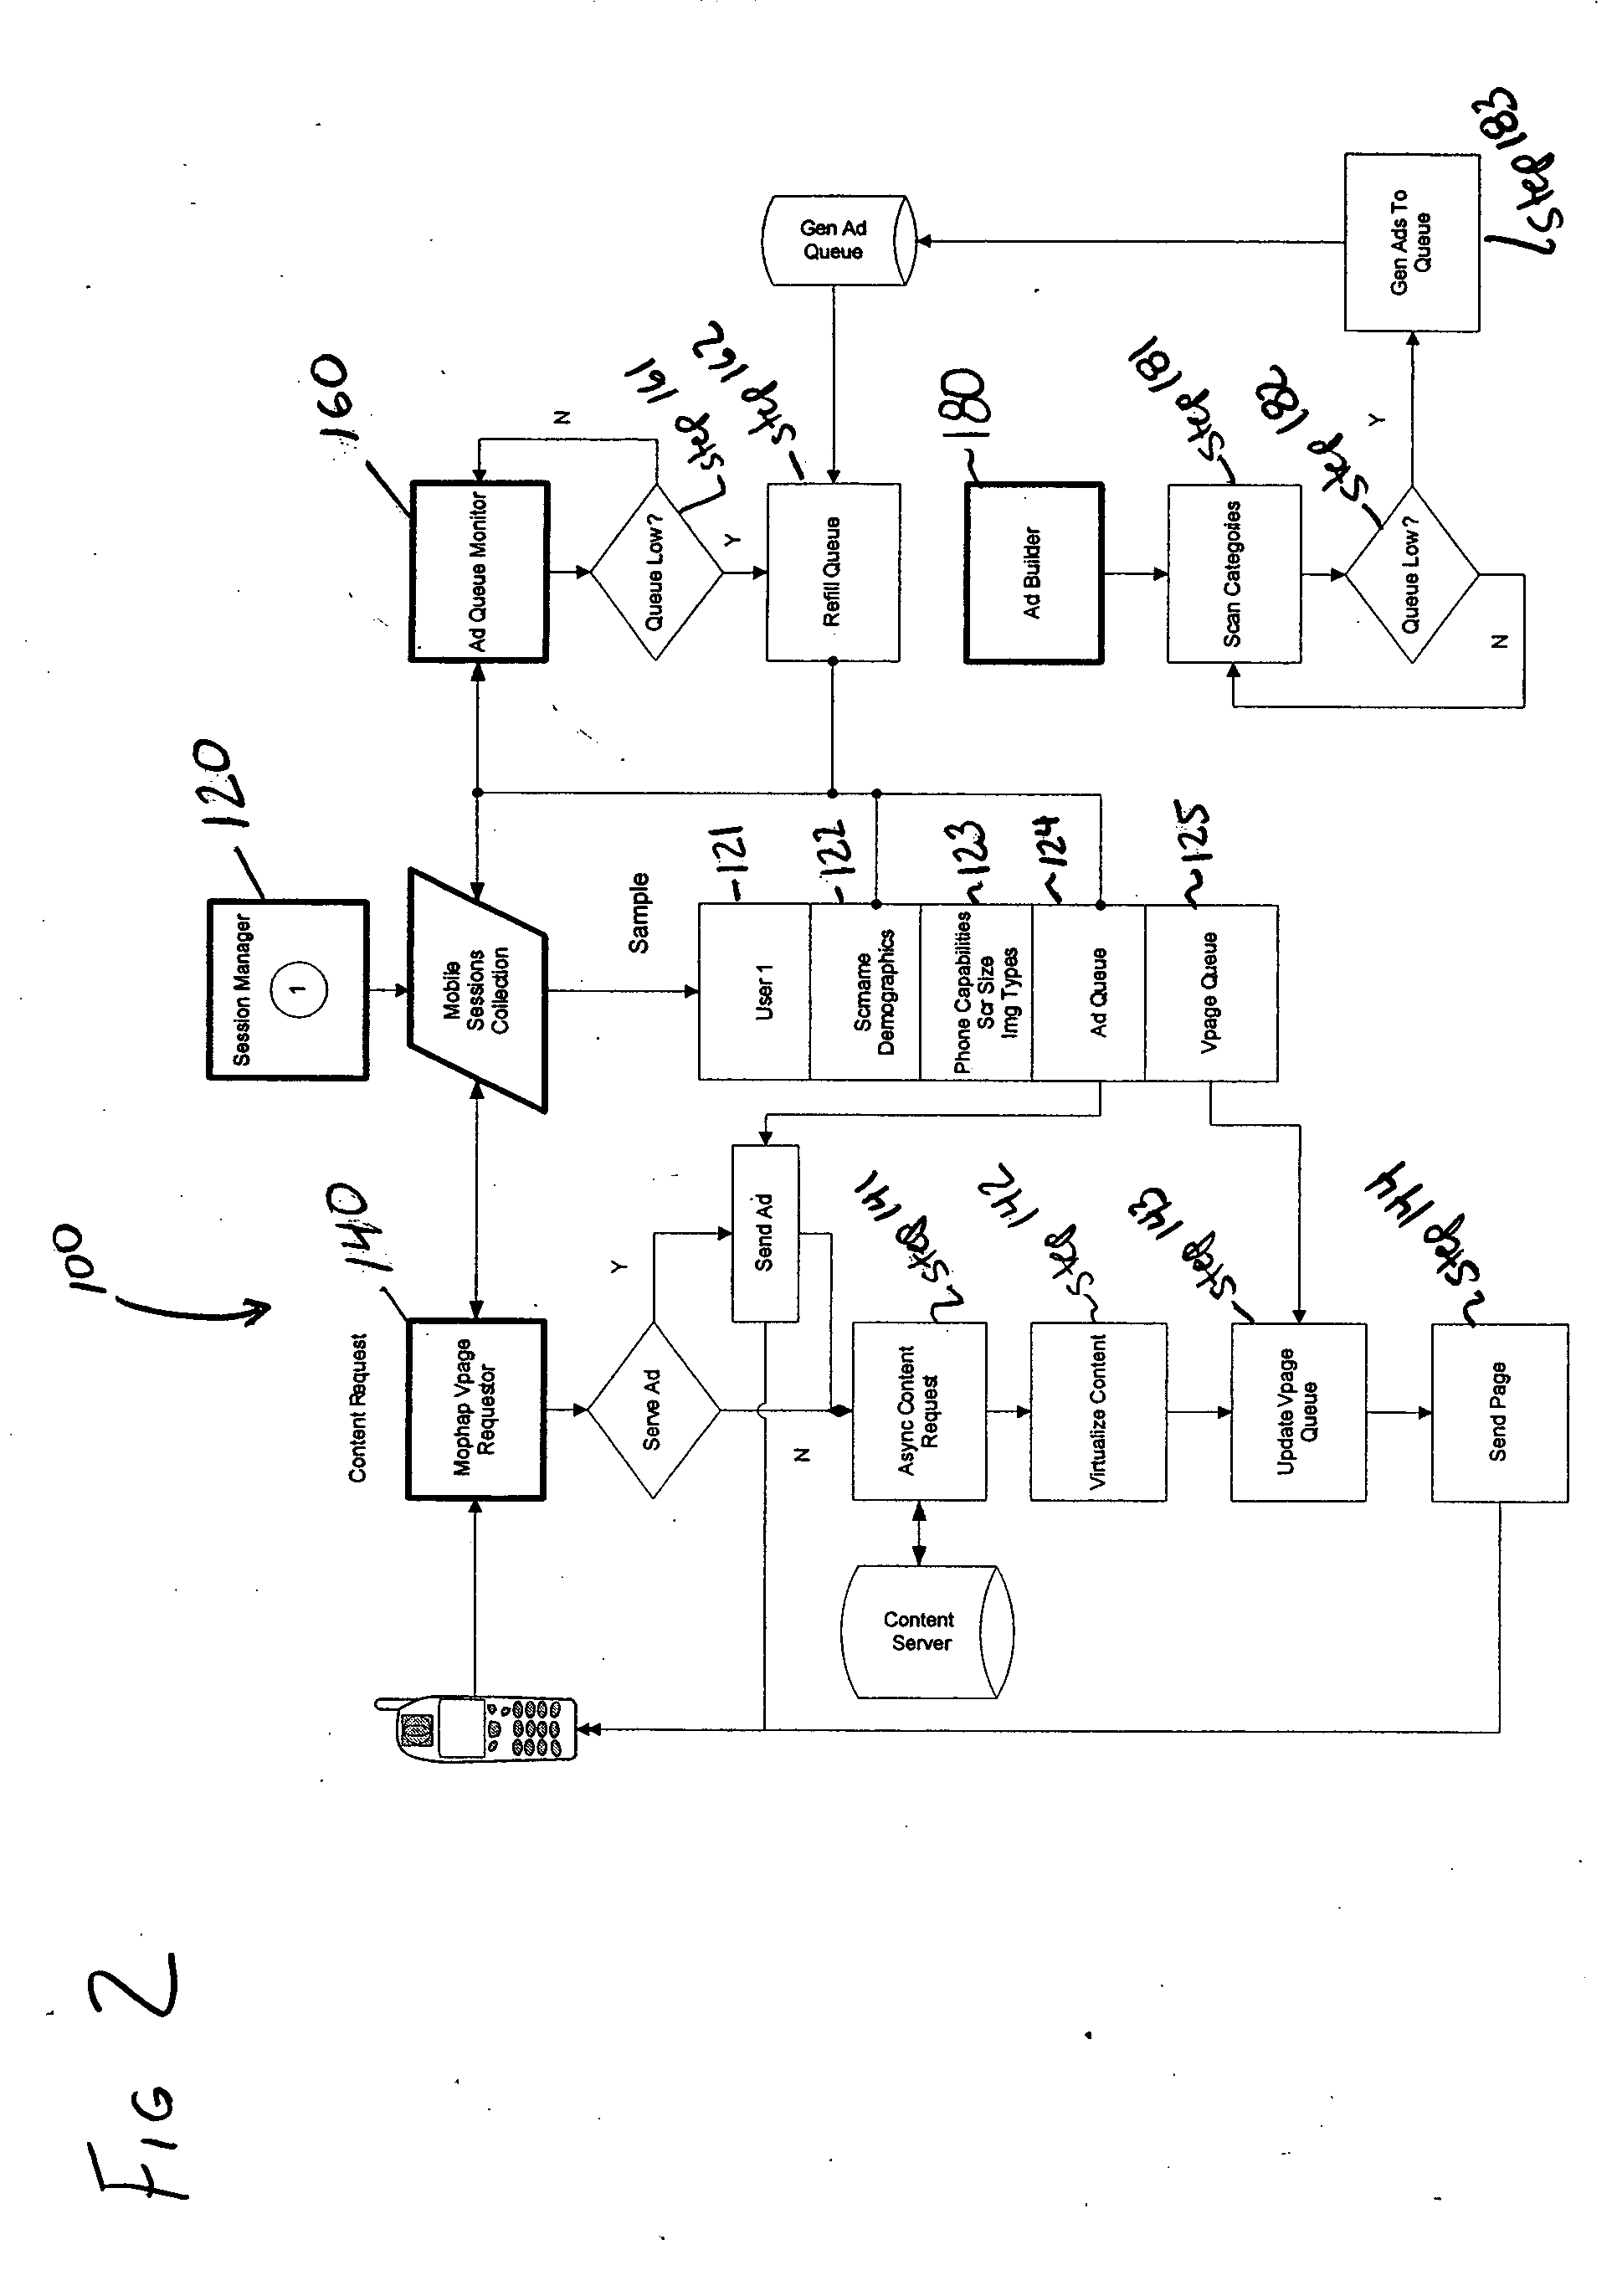 System and method for providing content to a mobile communication device